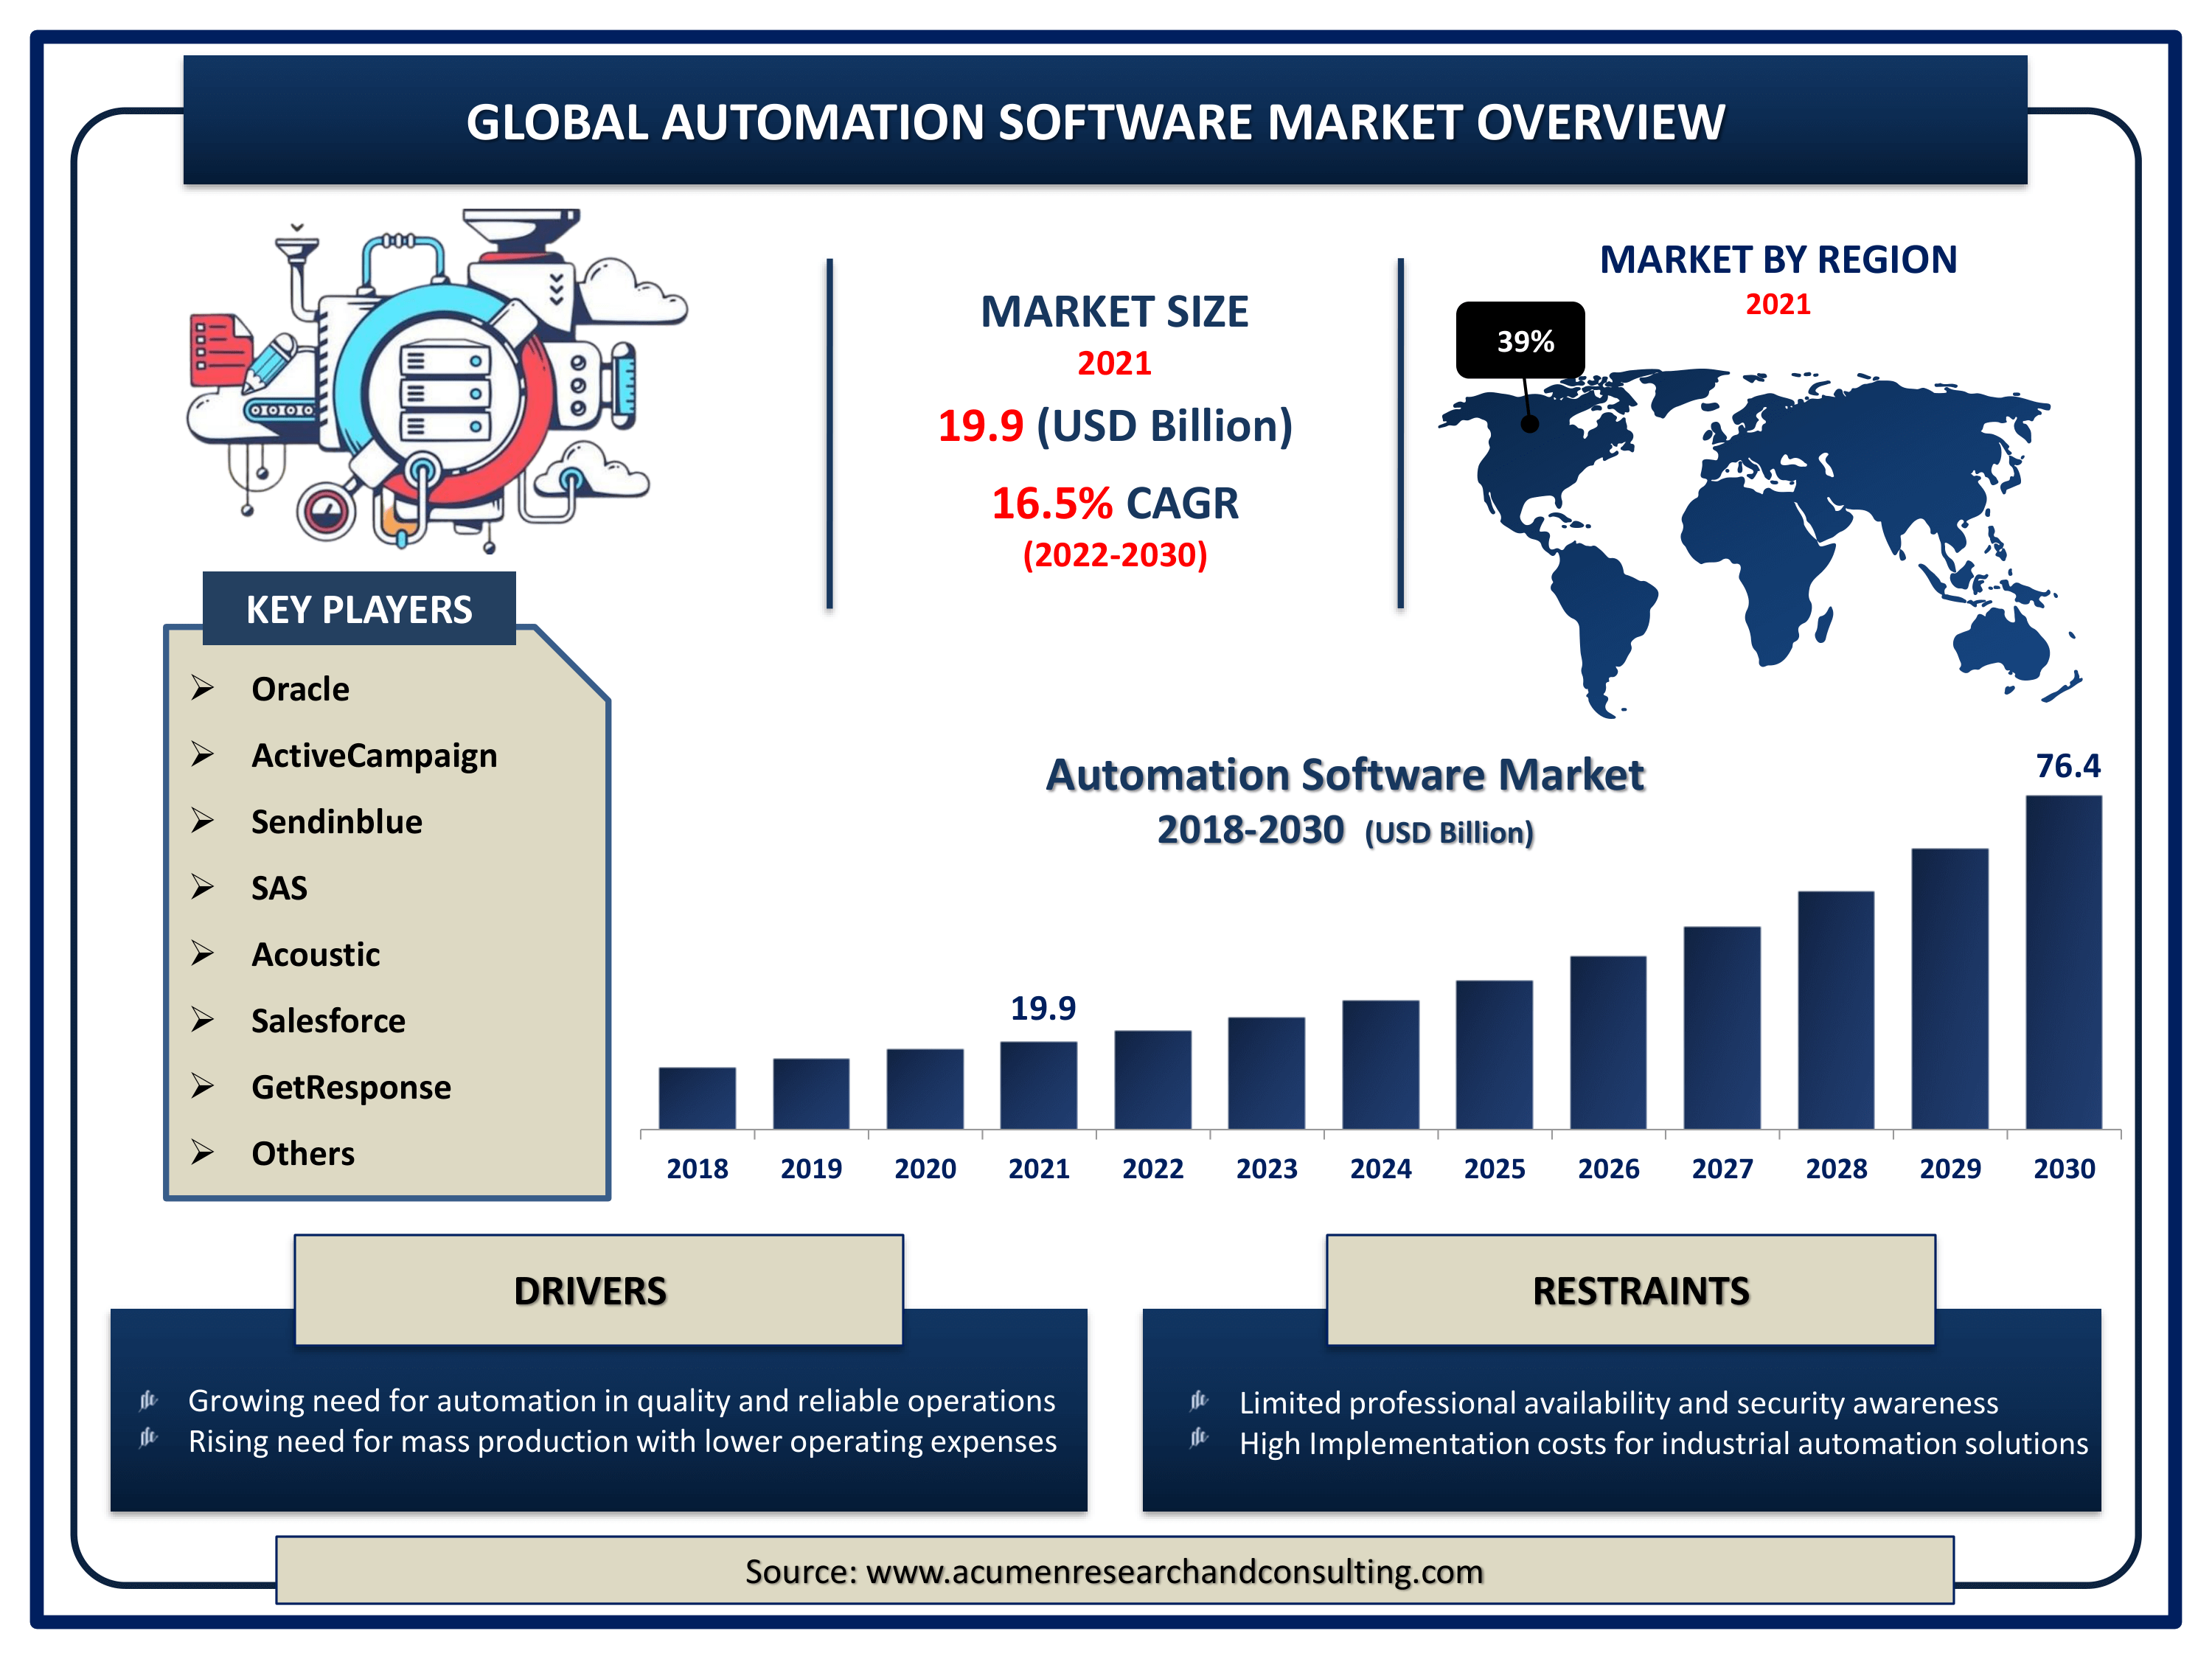 Global automation software market revenue is estimated to expand by USD 76.4 billion by 2030, with a 16.5% CAGR from 2022 to 2030.